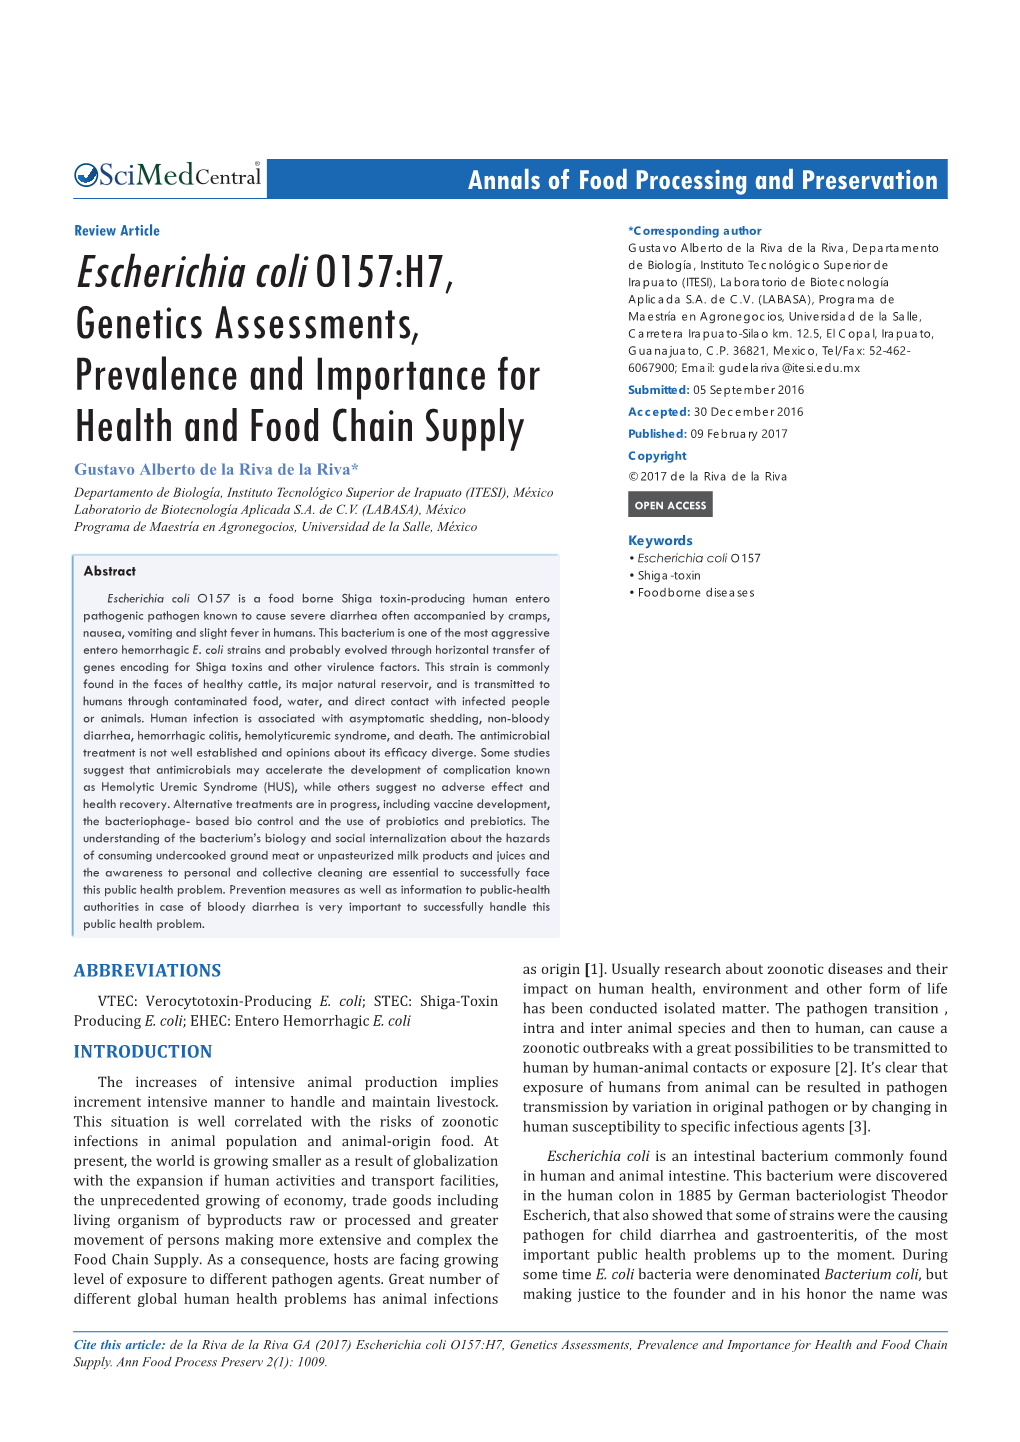 Escherichia Coli O157:H7, Genetics Assessments, Prevalence and Importance for Health and Food Chain Supply